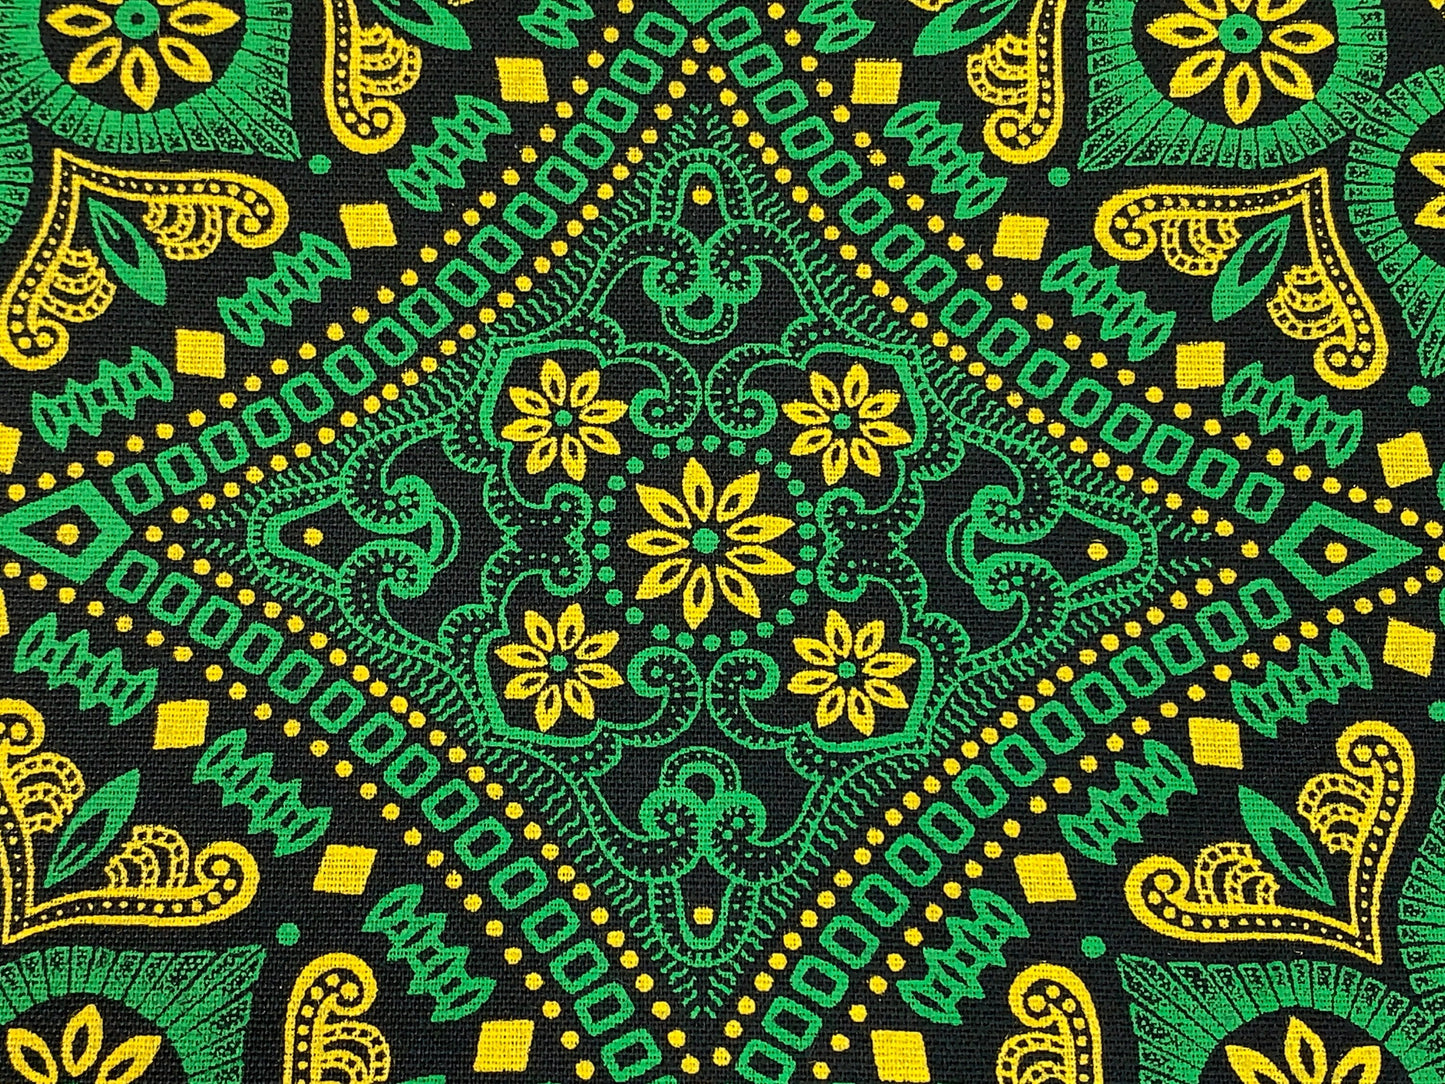 South African Shweshwe Fabric by the YARD. DaGama 3 Cats Green, Gold, Black Giant Mandala. Cotton Fabric for Quilting, Apparel, Home Decor.